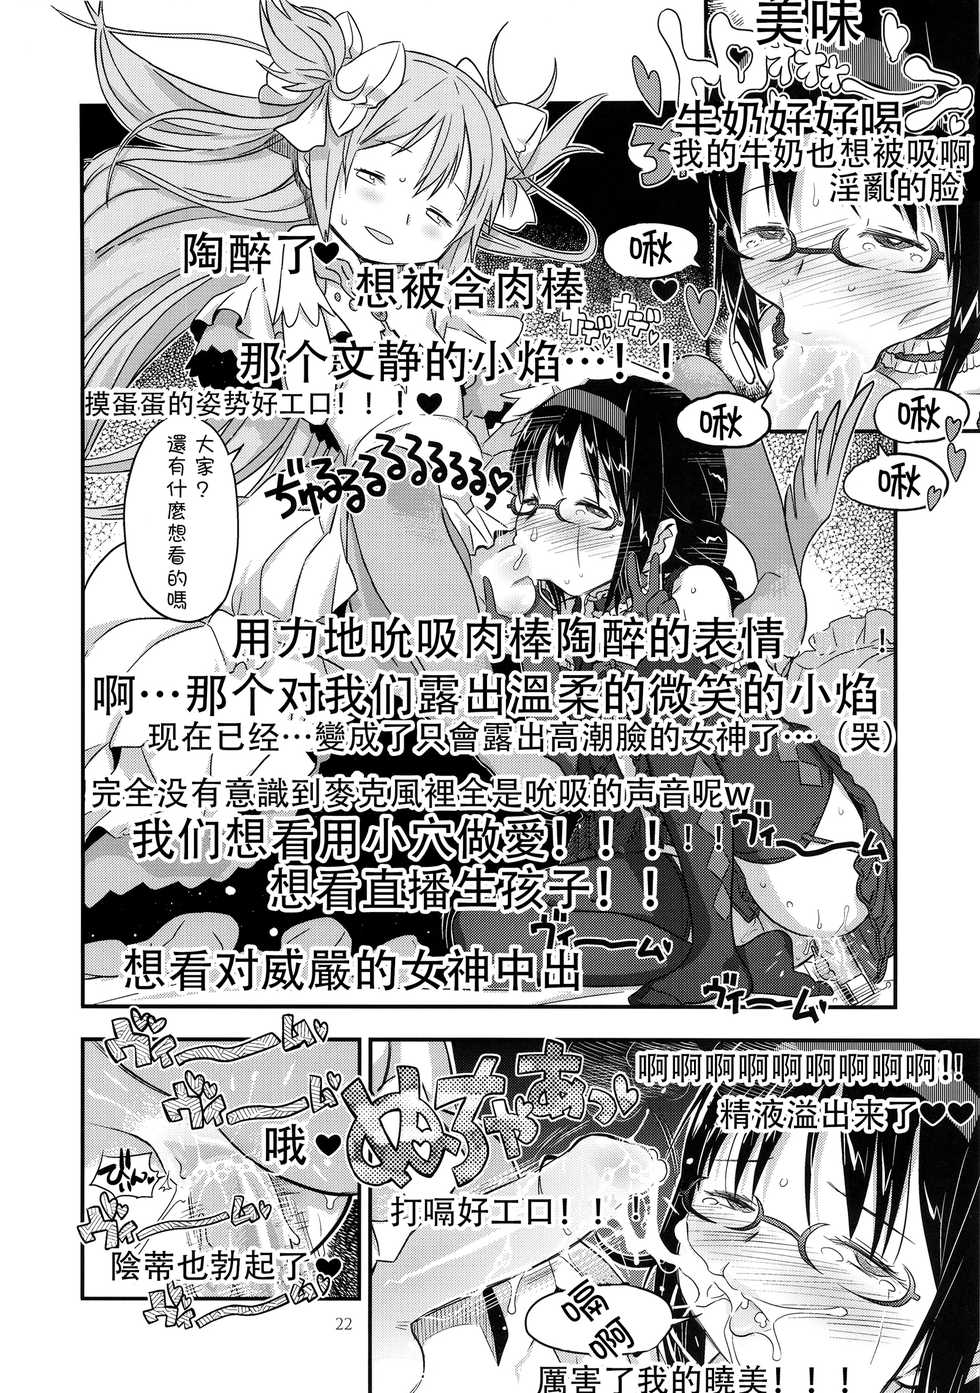 (C89) [GADGET (A-10, Ore to Umi, GOMOS)] GIRLIE:EX02 (Puella Magi Madoka Magica) [Chinese] [沒有漢化] - Page 23